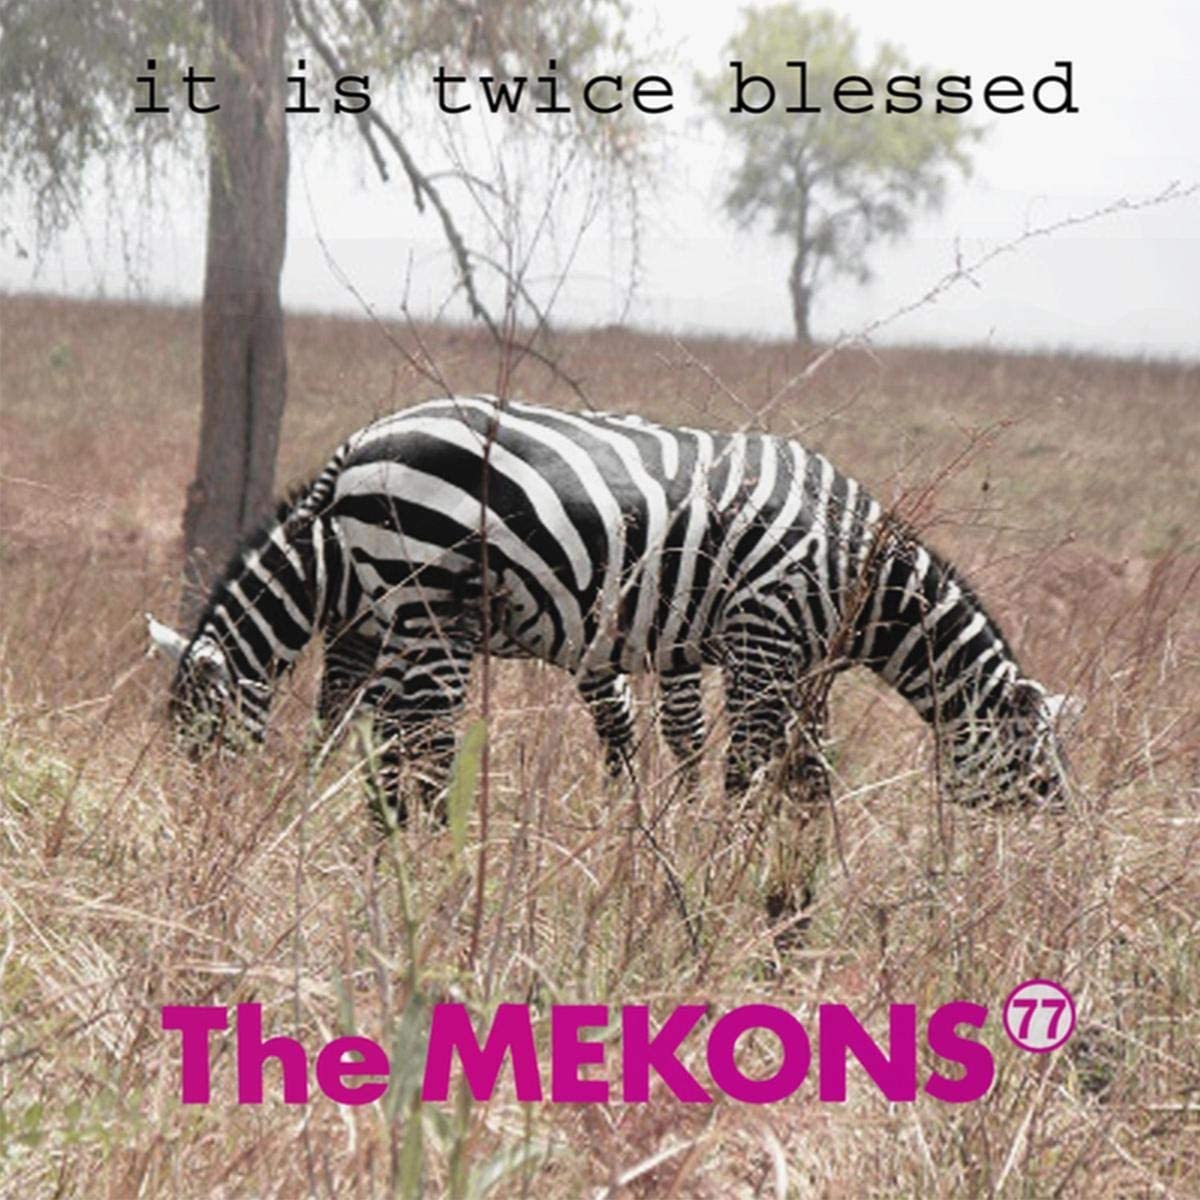 Mekons 77, The/It Is Twice Blessed [LP]